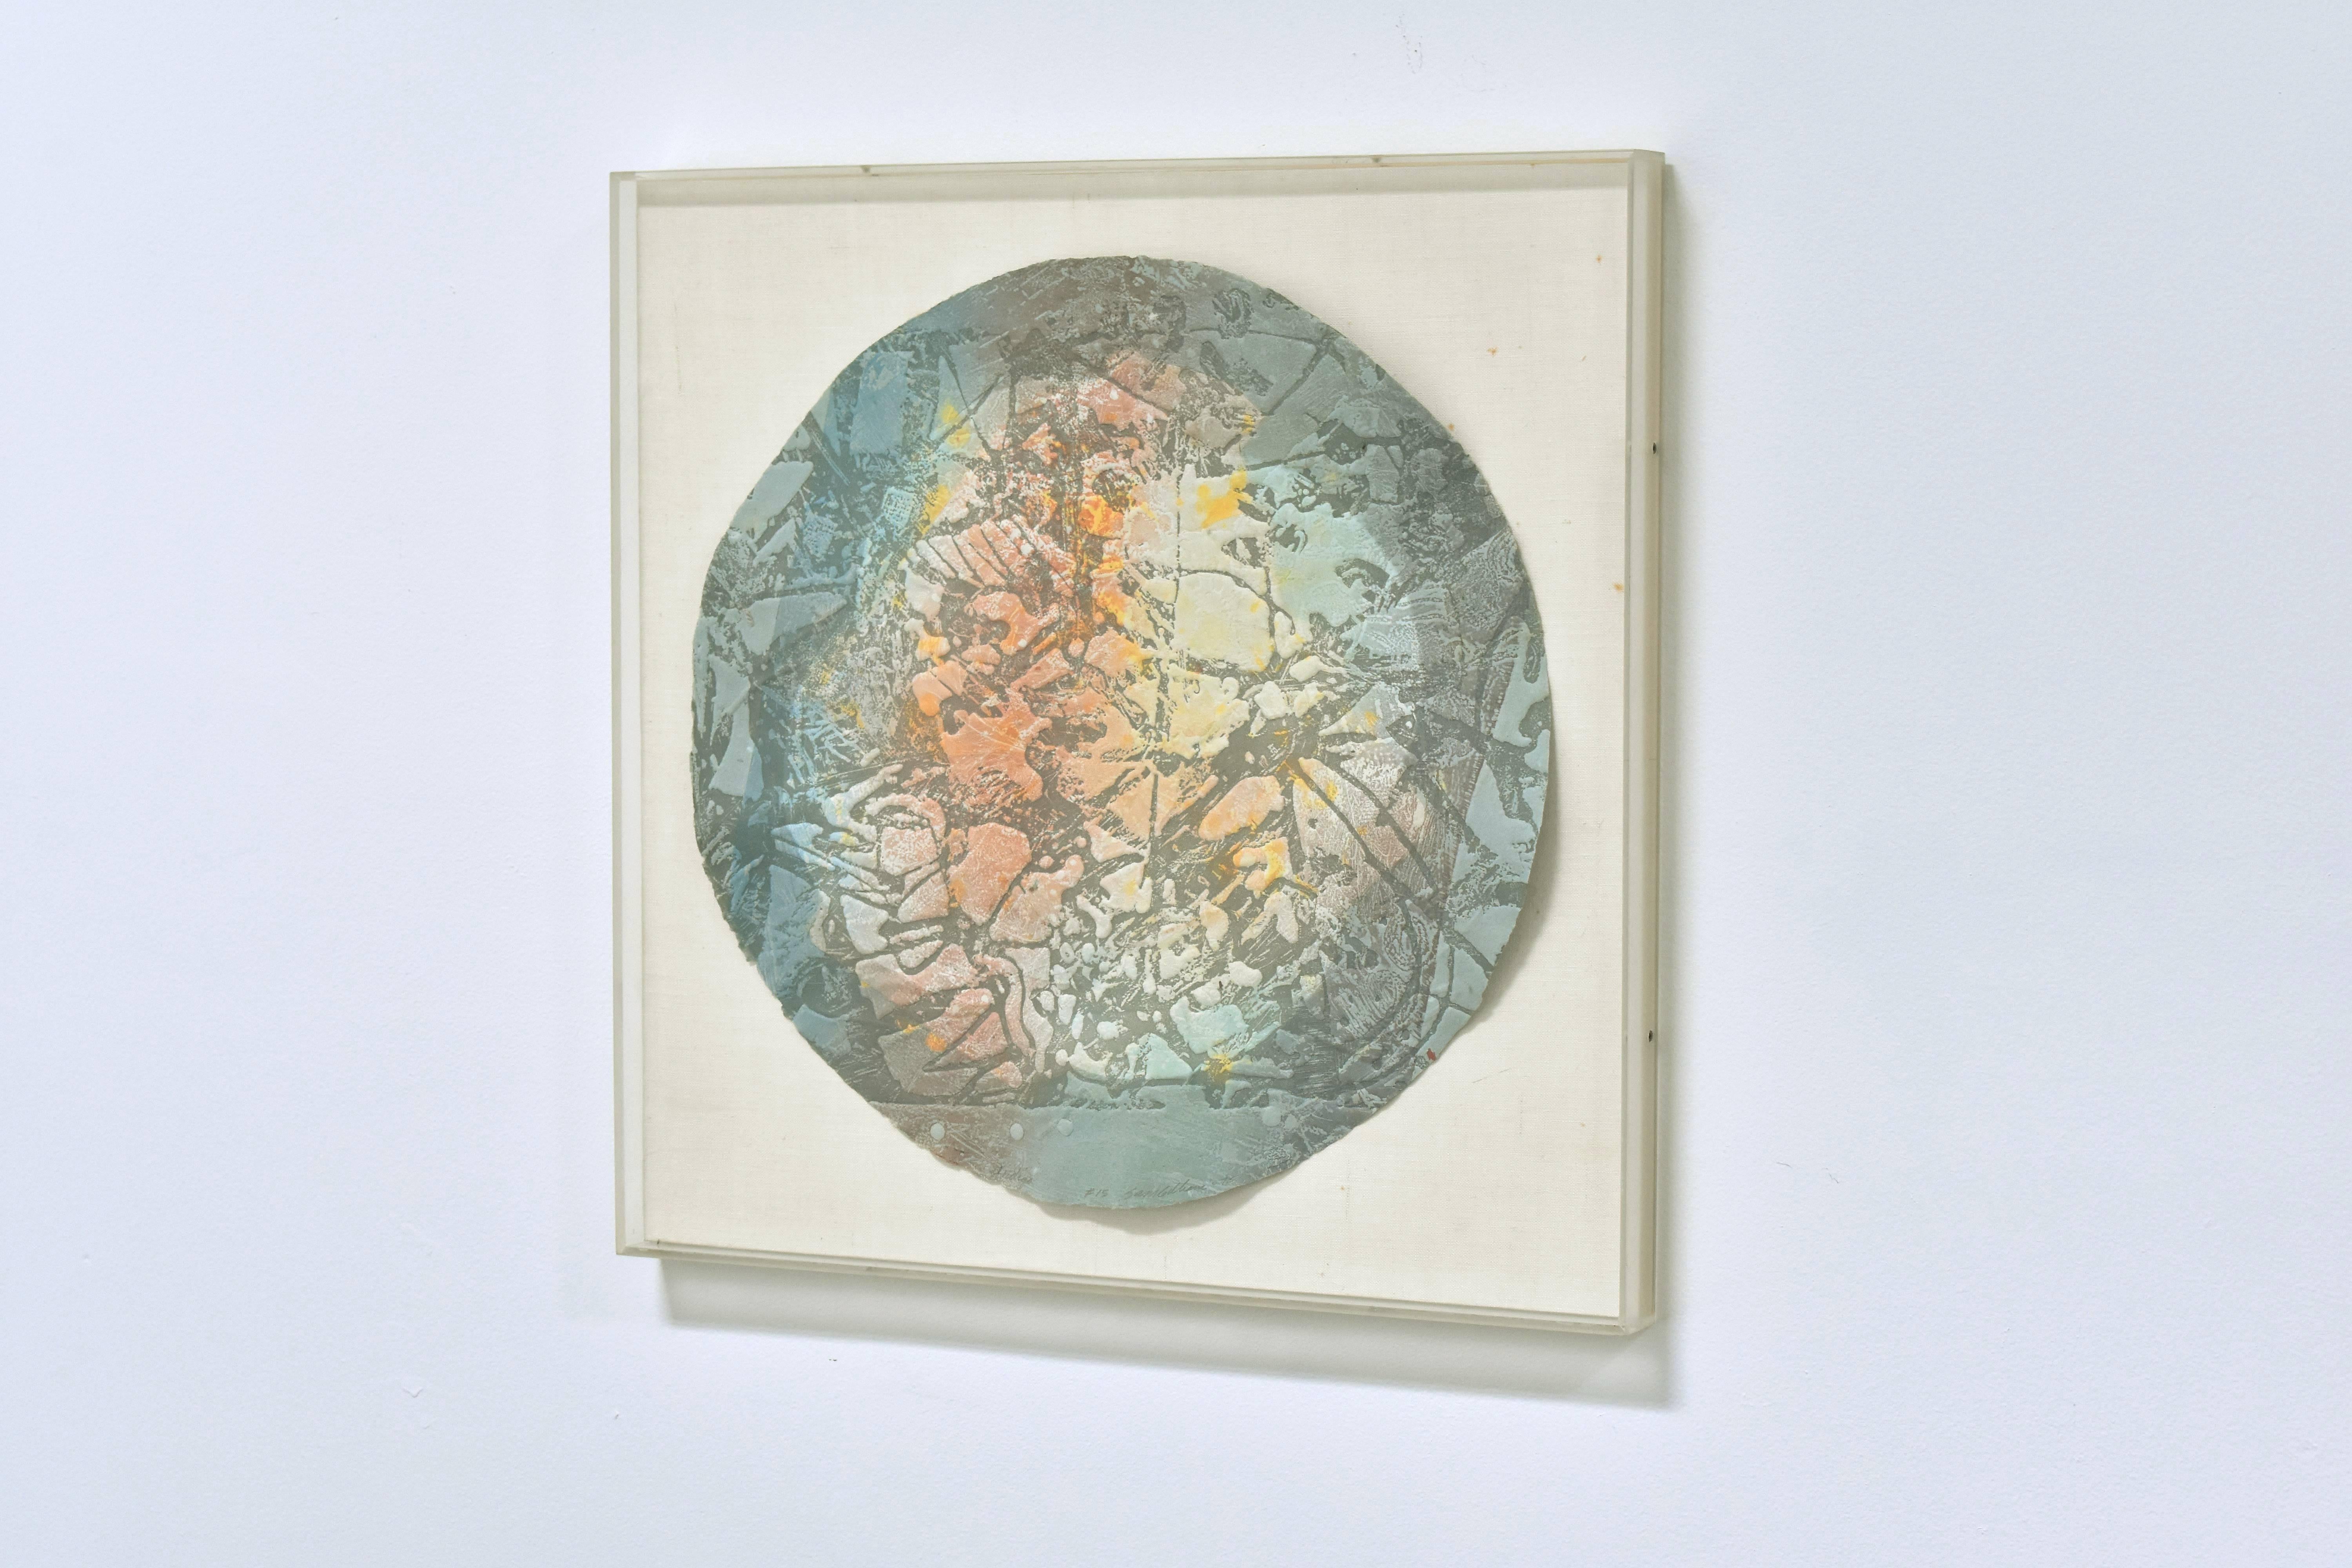 A mixed media artwork by important American artist Sam Gilliam. From an edition of 16 unique works of art, created in 1975. The color palette of red, blue, yellow, orange on a round/disk-shaped piece of handmade paper, mounted in a plexiglass